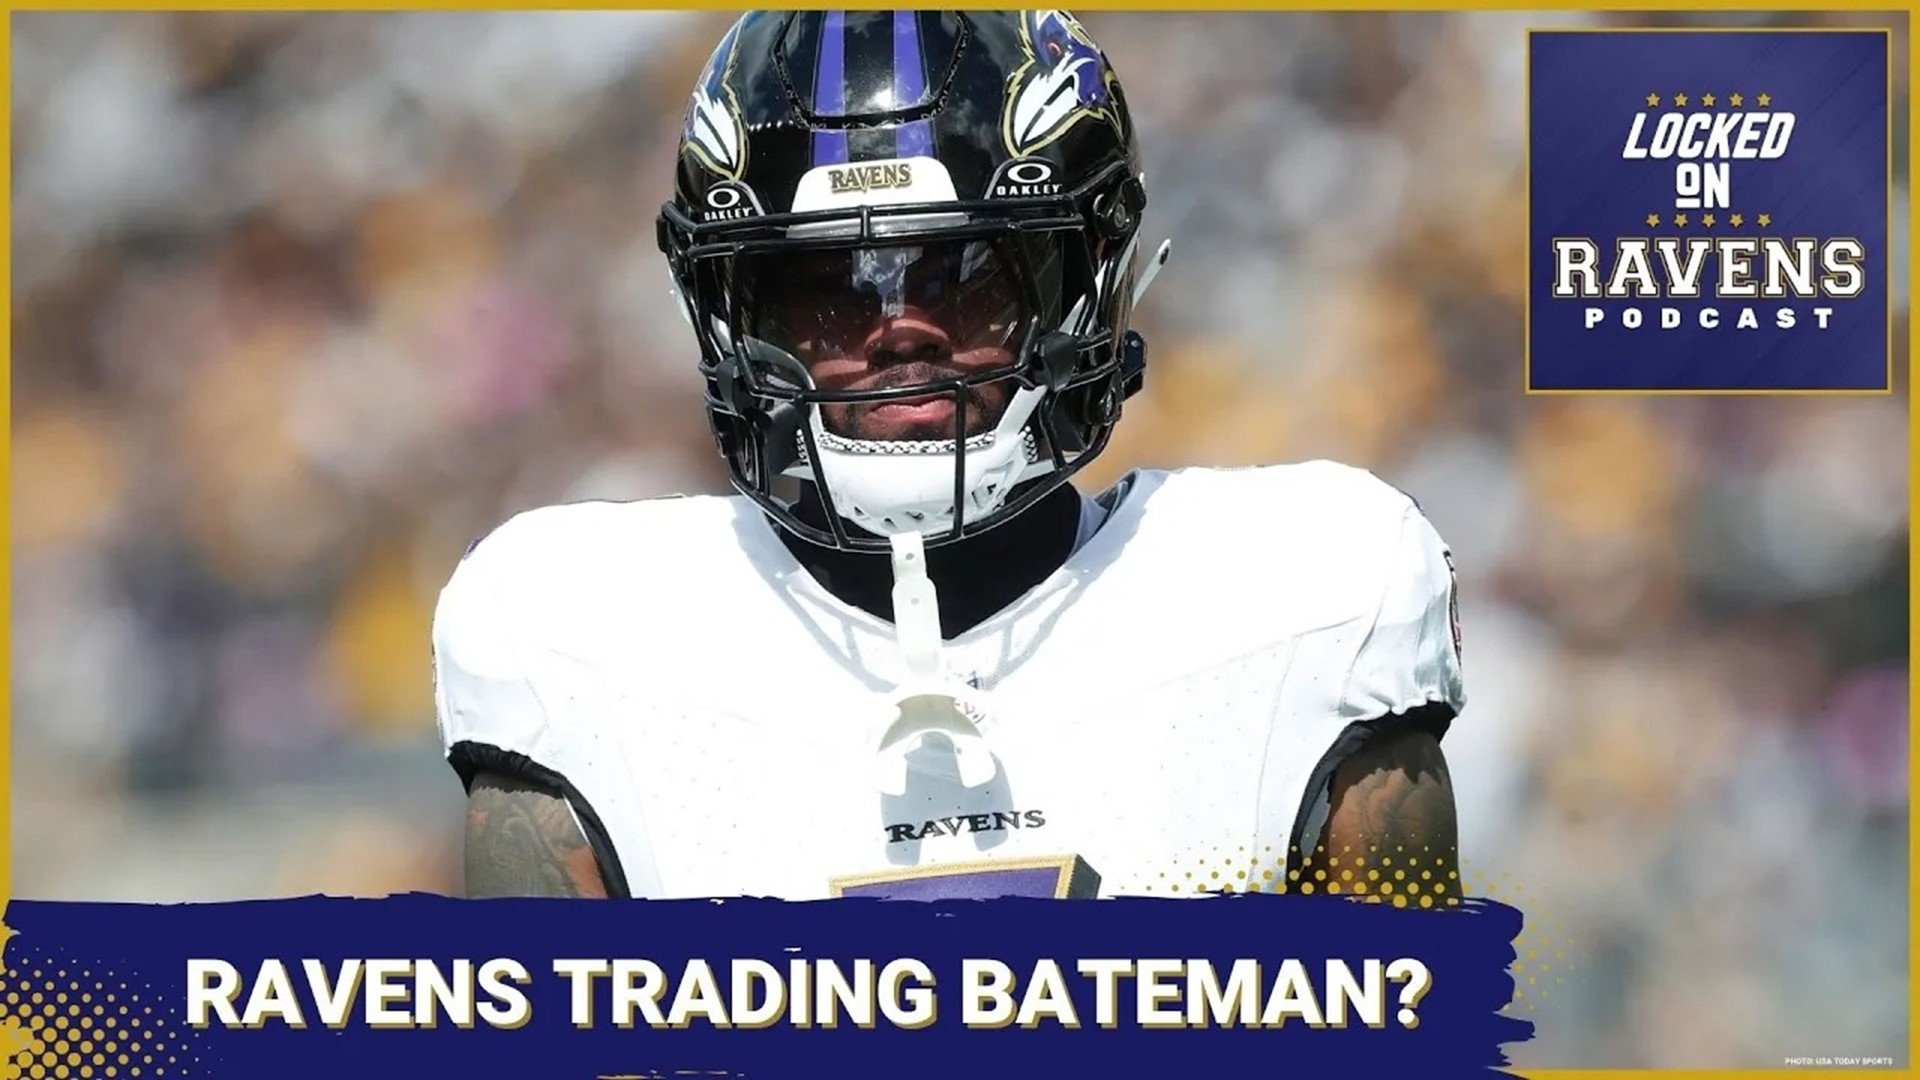 We look at if the Baltimore Ravens are gearing up to trade Rashod Bateman during the 2024 NFL draft with Rocco DiSangro, discussing what could happen and more.